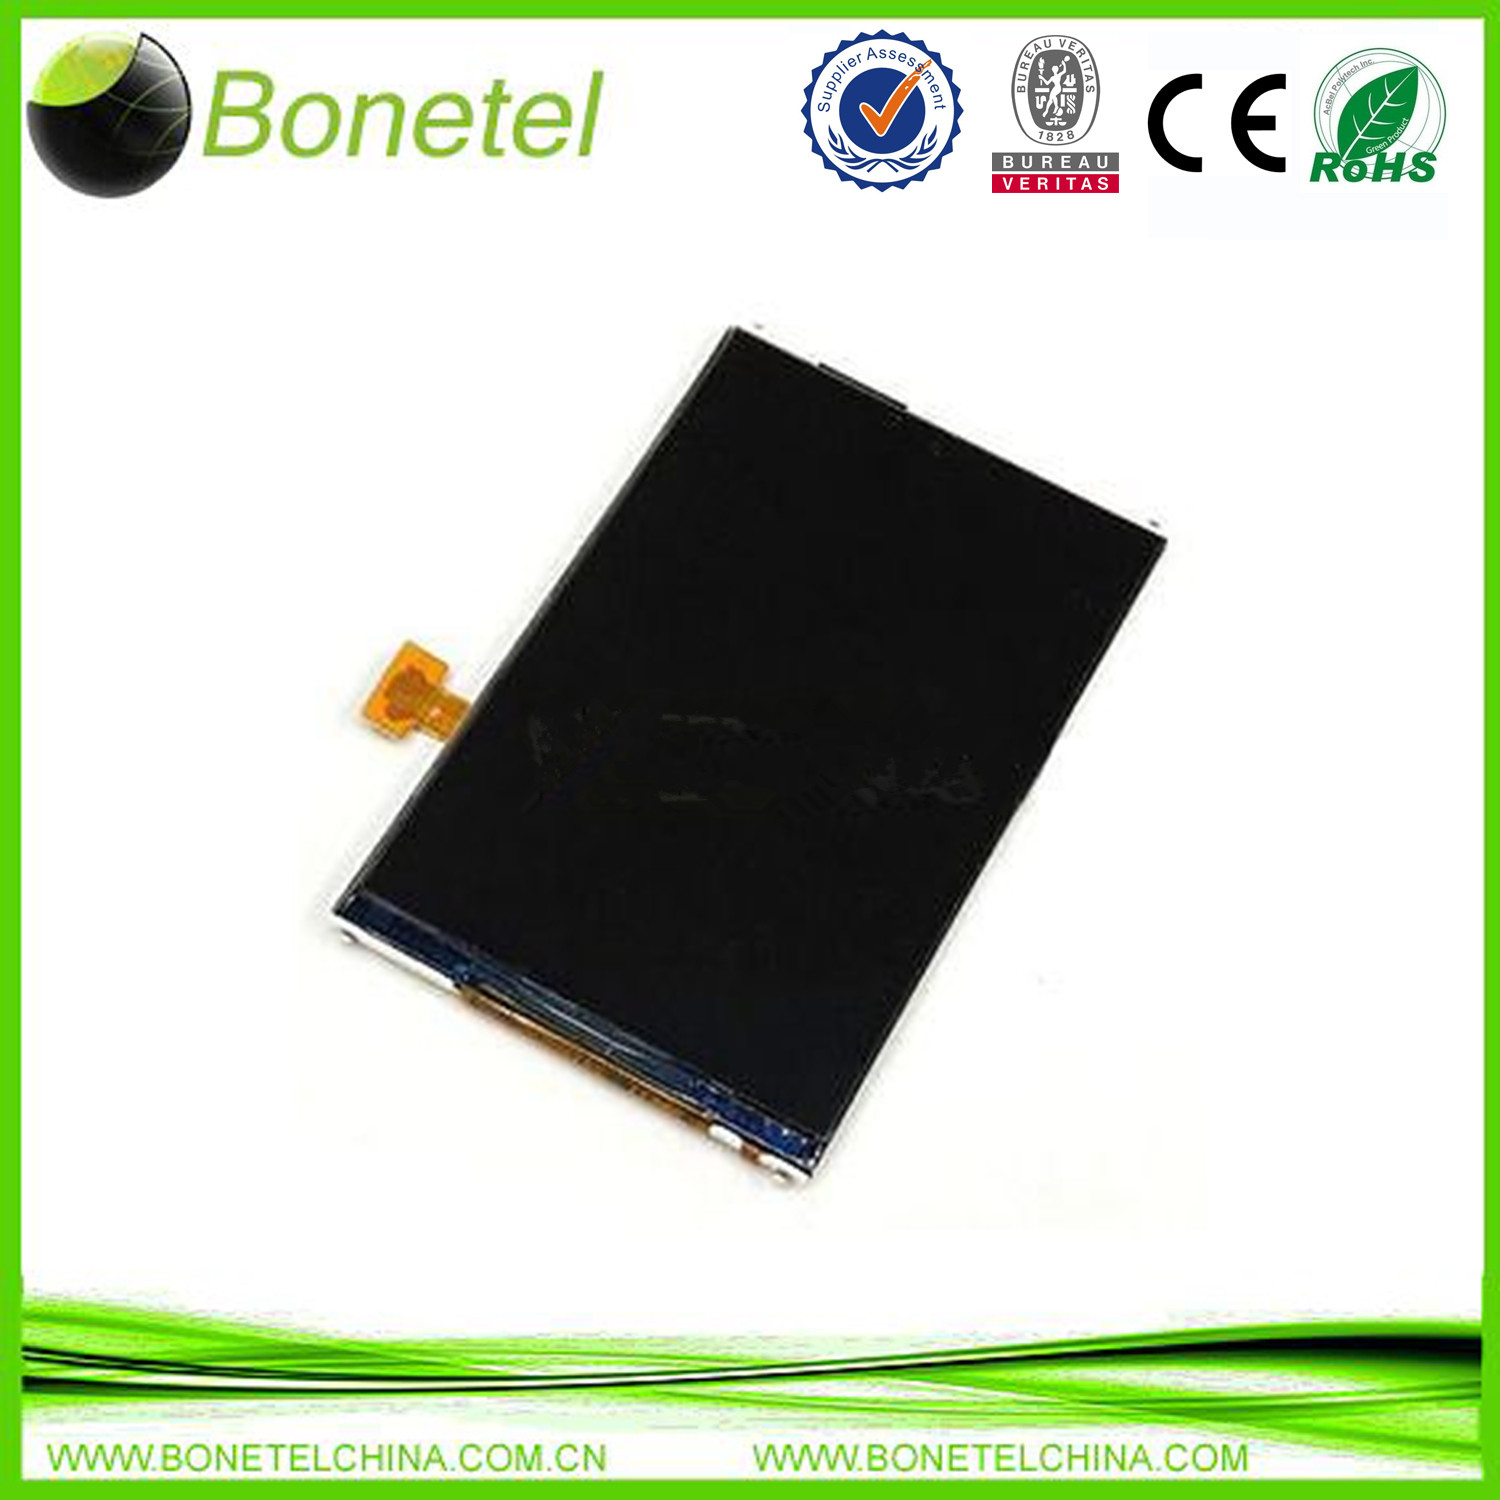 LCD display screen Panel replacement for Samsung Star Deluxe duo S5292